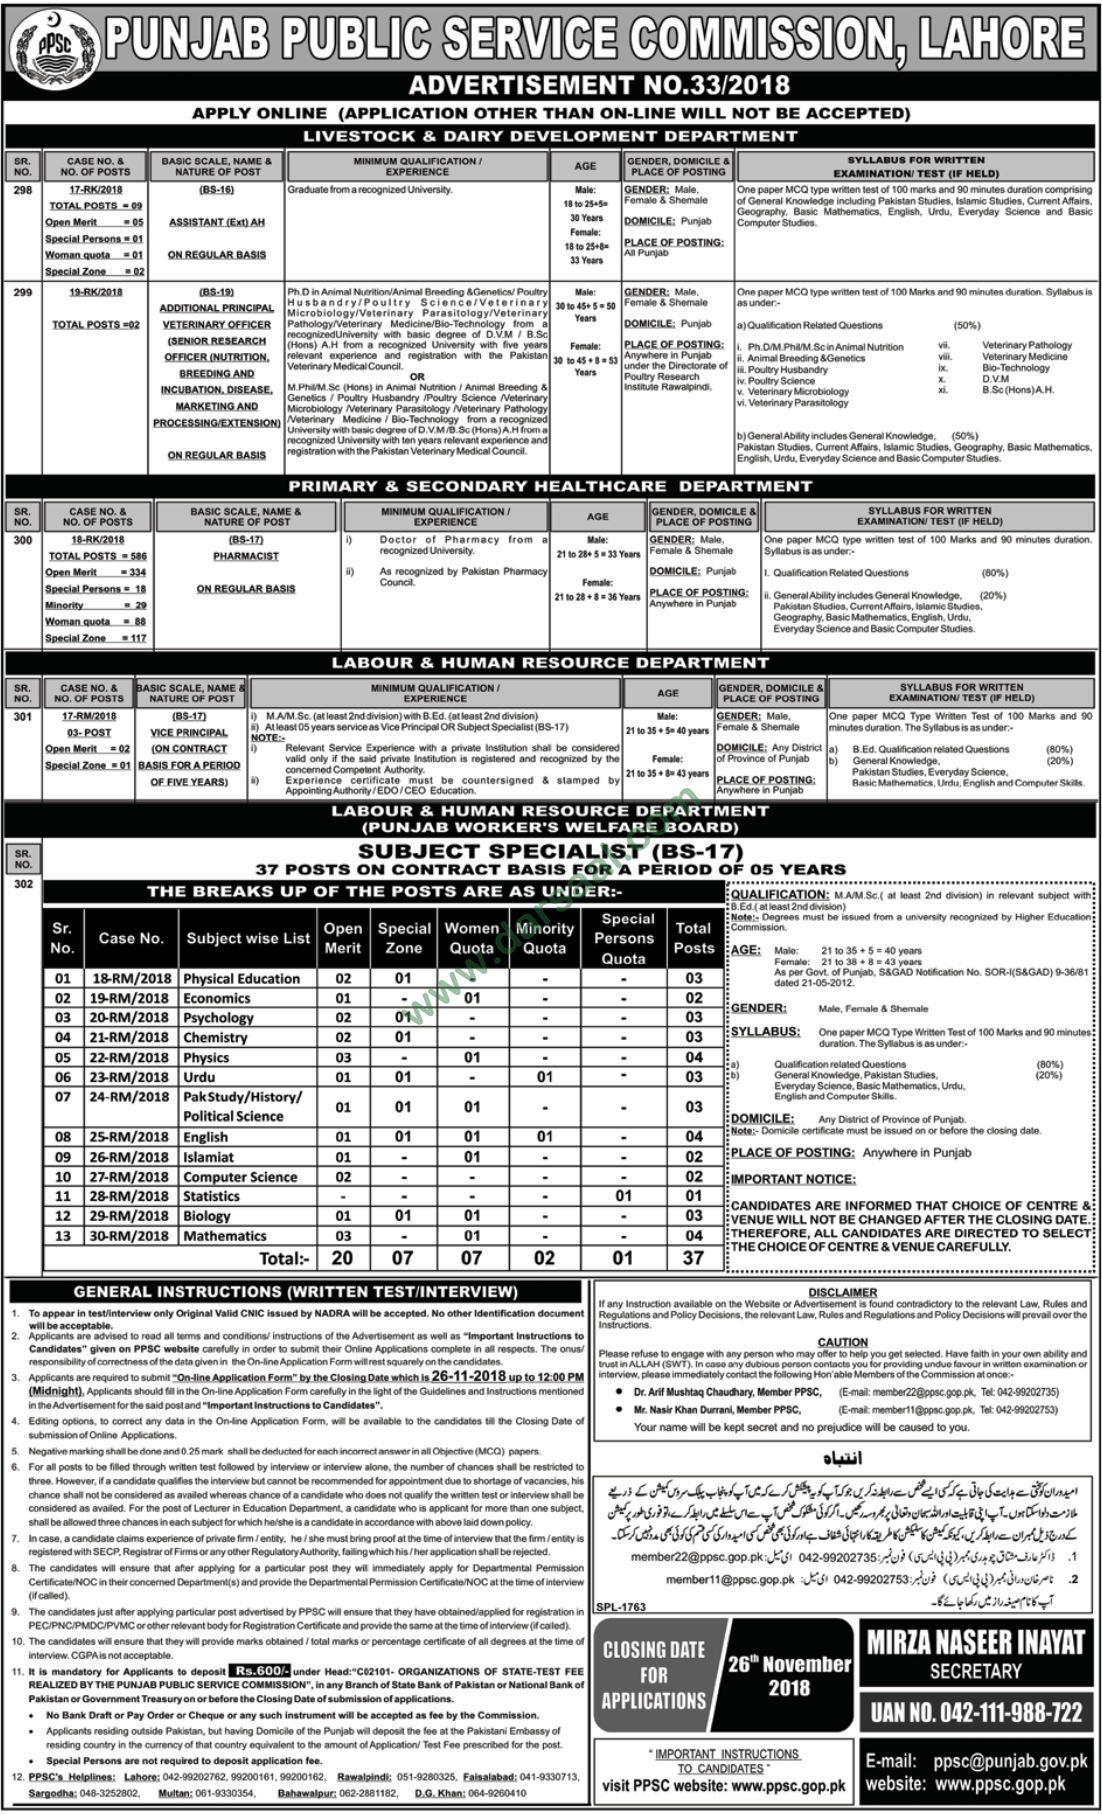 Assistant Jobs in Punjab Public Service Commission - PPSC in Faisalabad - Nov 11, 2018